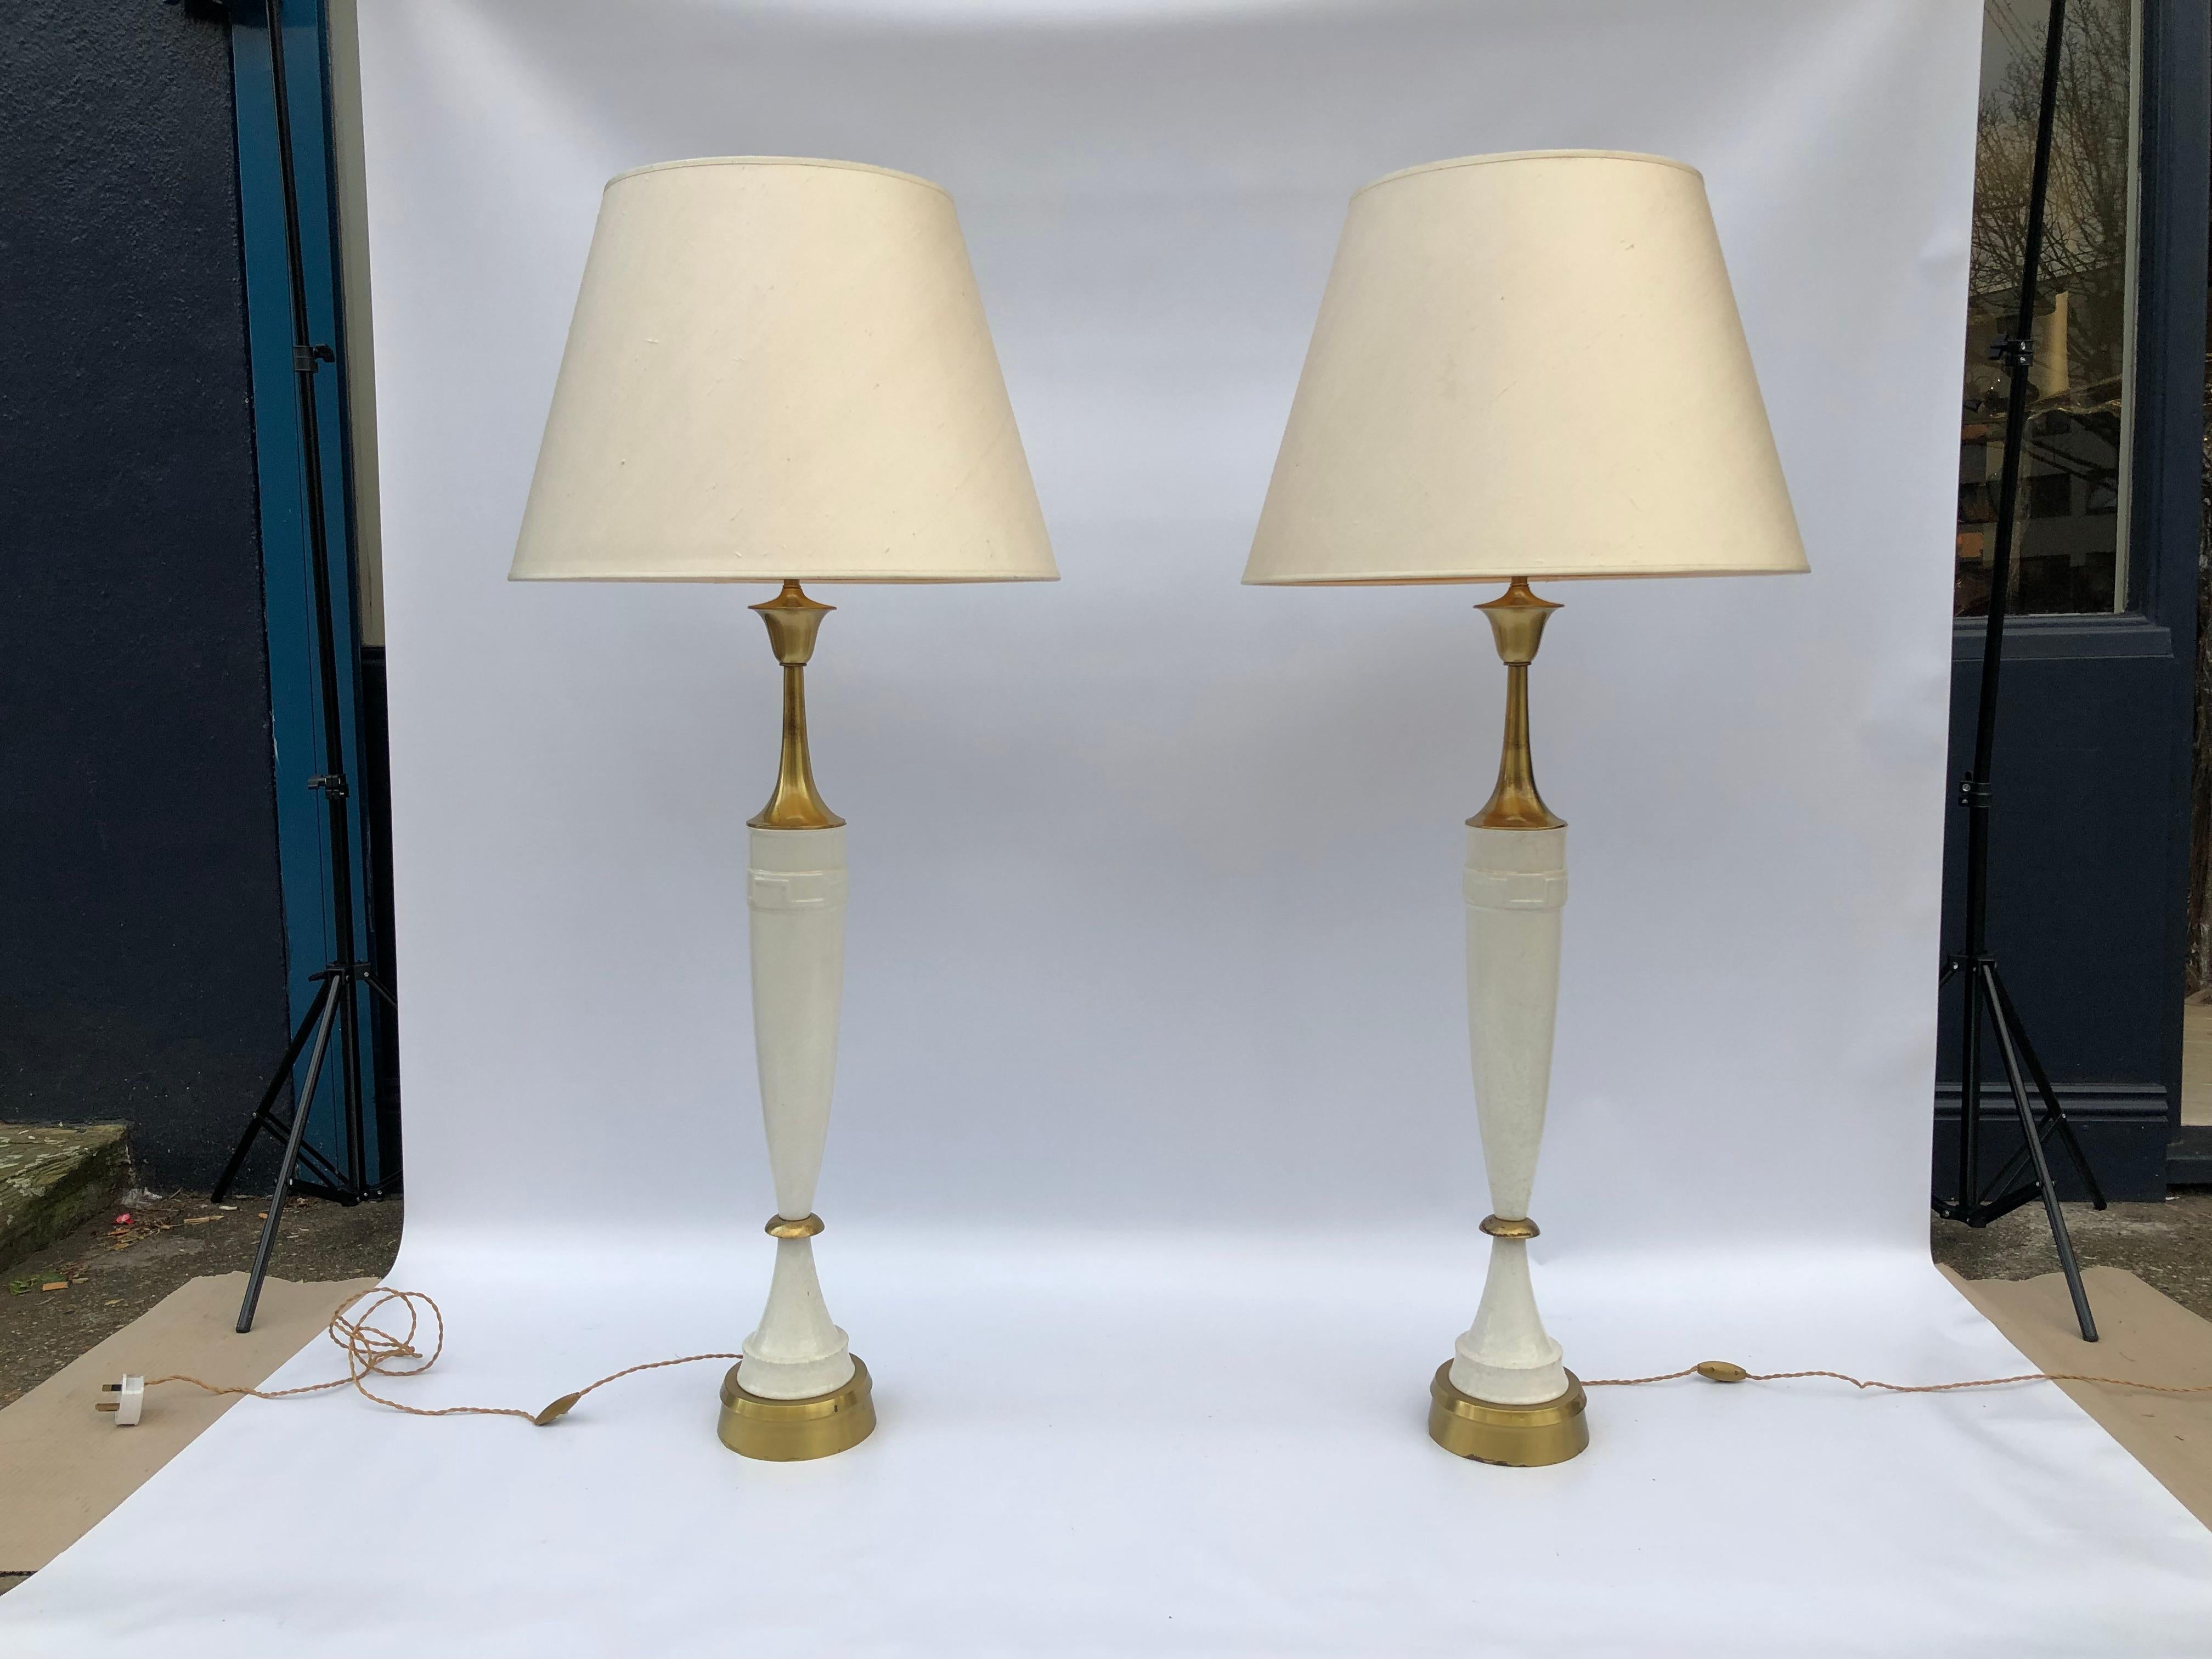 A pair of identical and impressively tall table lamps by LAUREL imported from USA in the early 70s and have been in the same estate since. 

They are made from a stylish cream ceramic and brass elegant finishings. There is a neo-classical element to